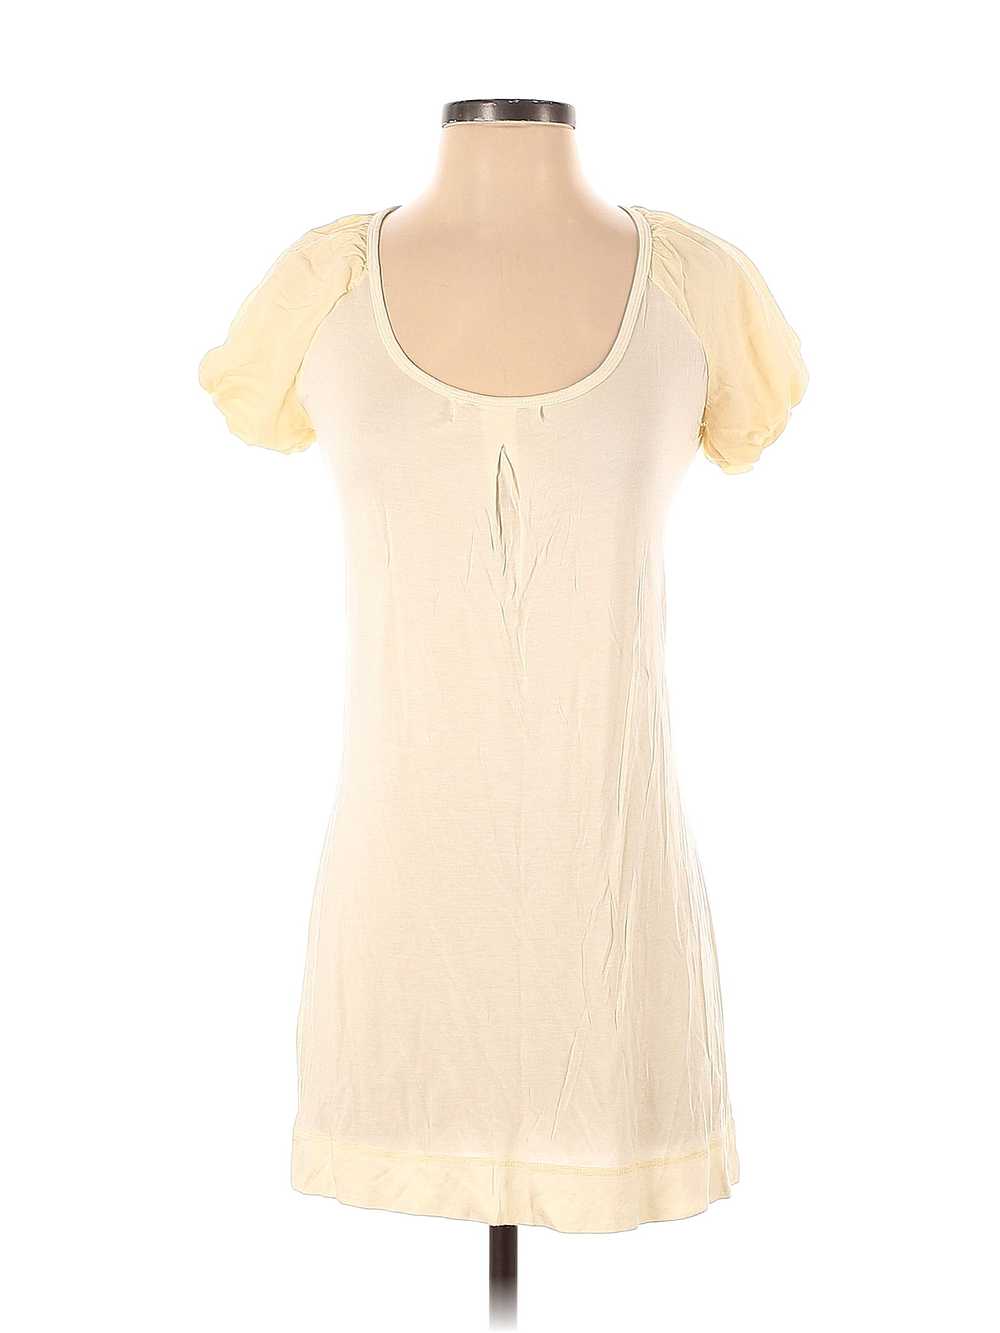 Unbranded Women Ivory Casual Dress XS - image 1